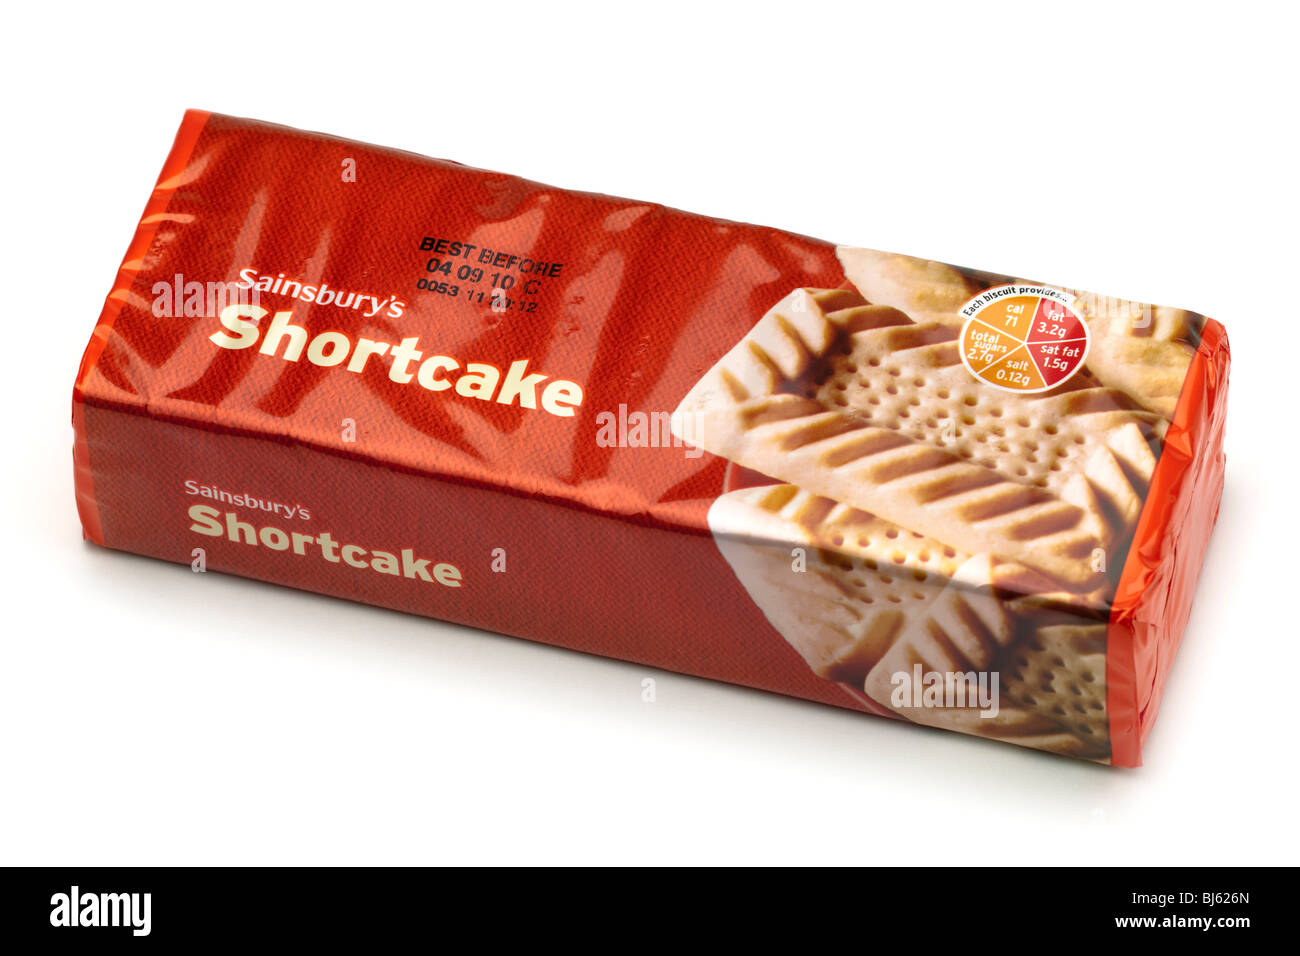 Packet of Sainsbury's Shortcake biscuits Stock Photo